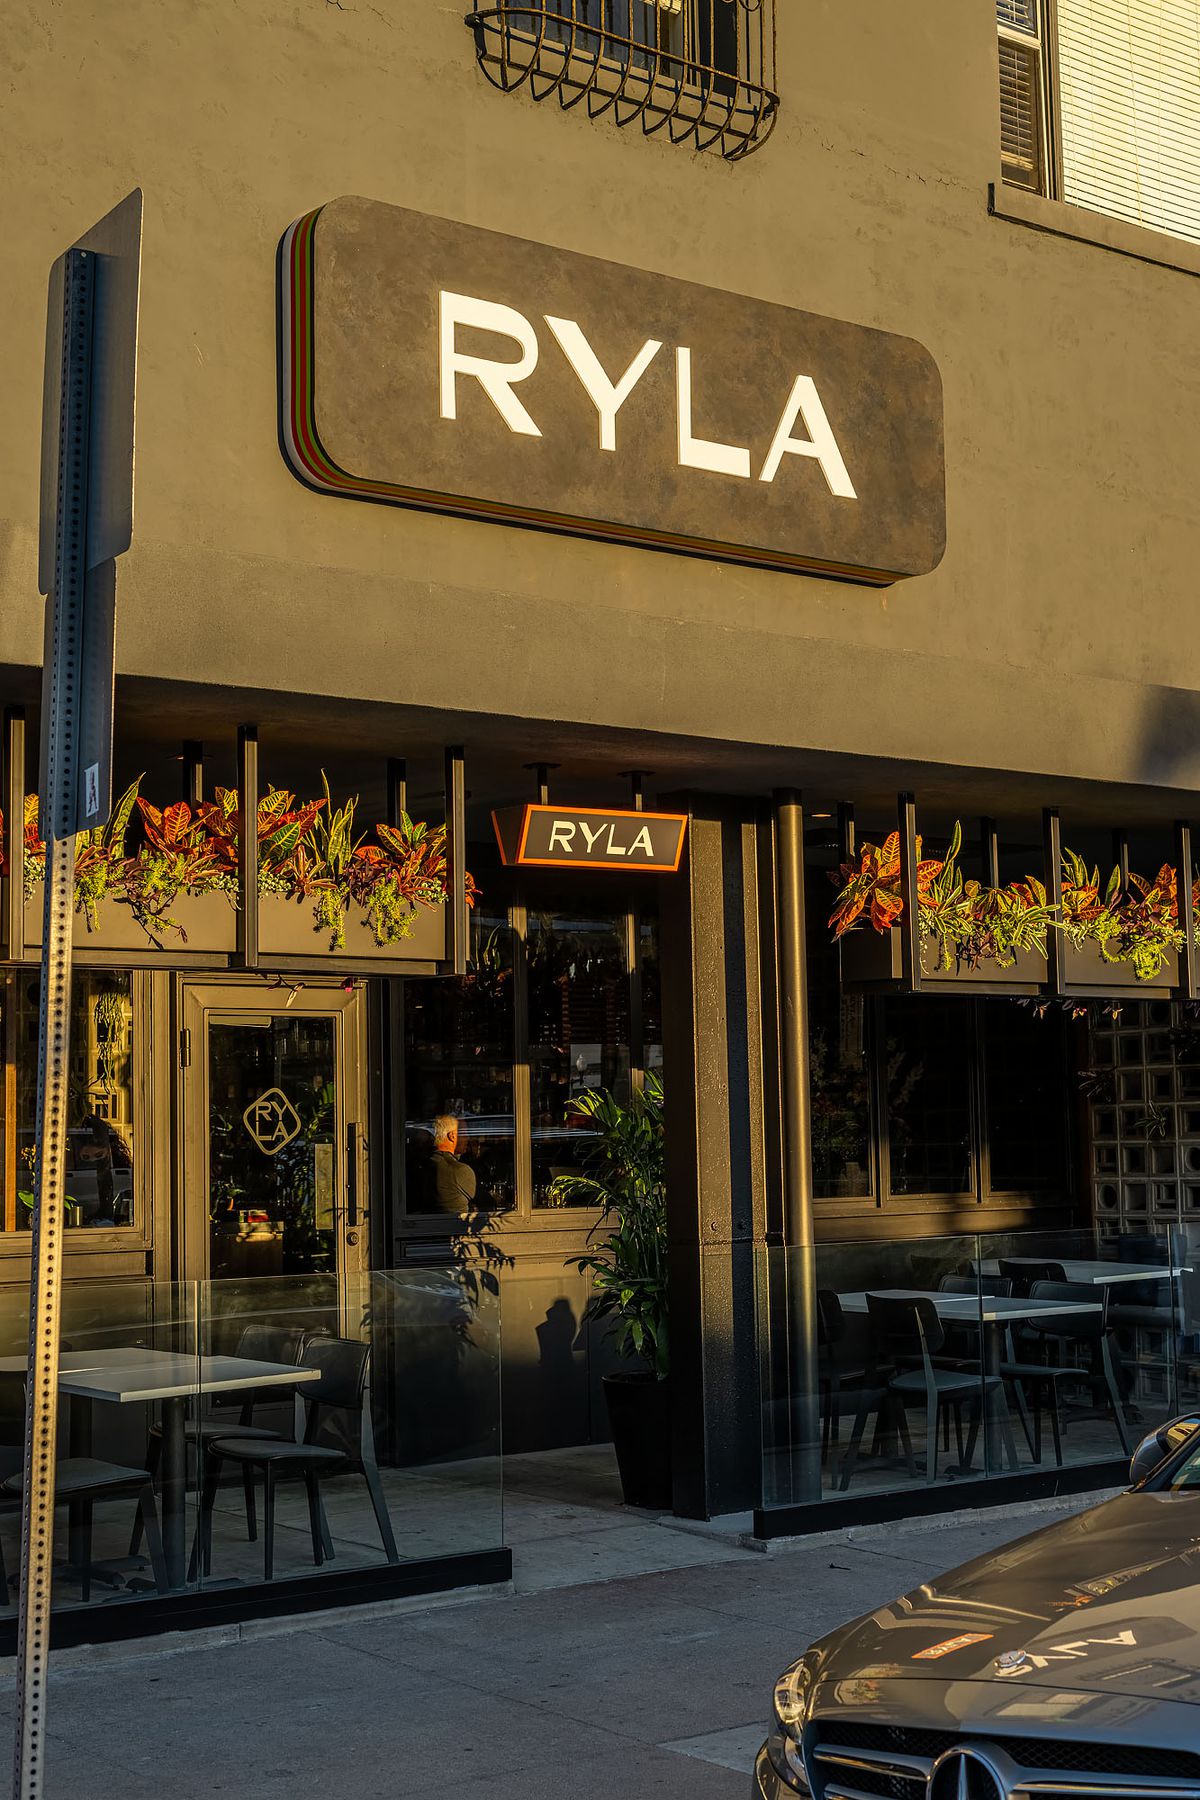 Outside Ryla storefront with patio seats.